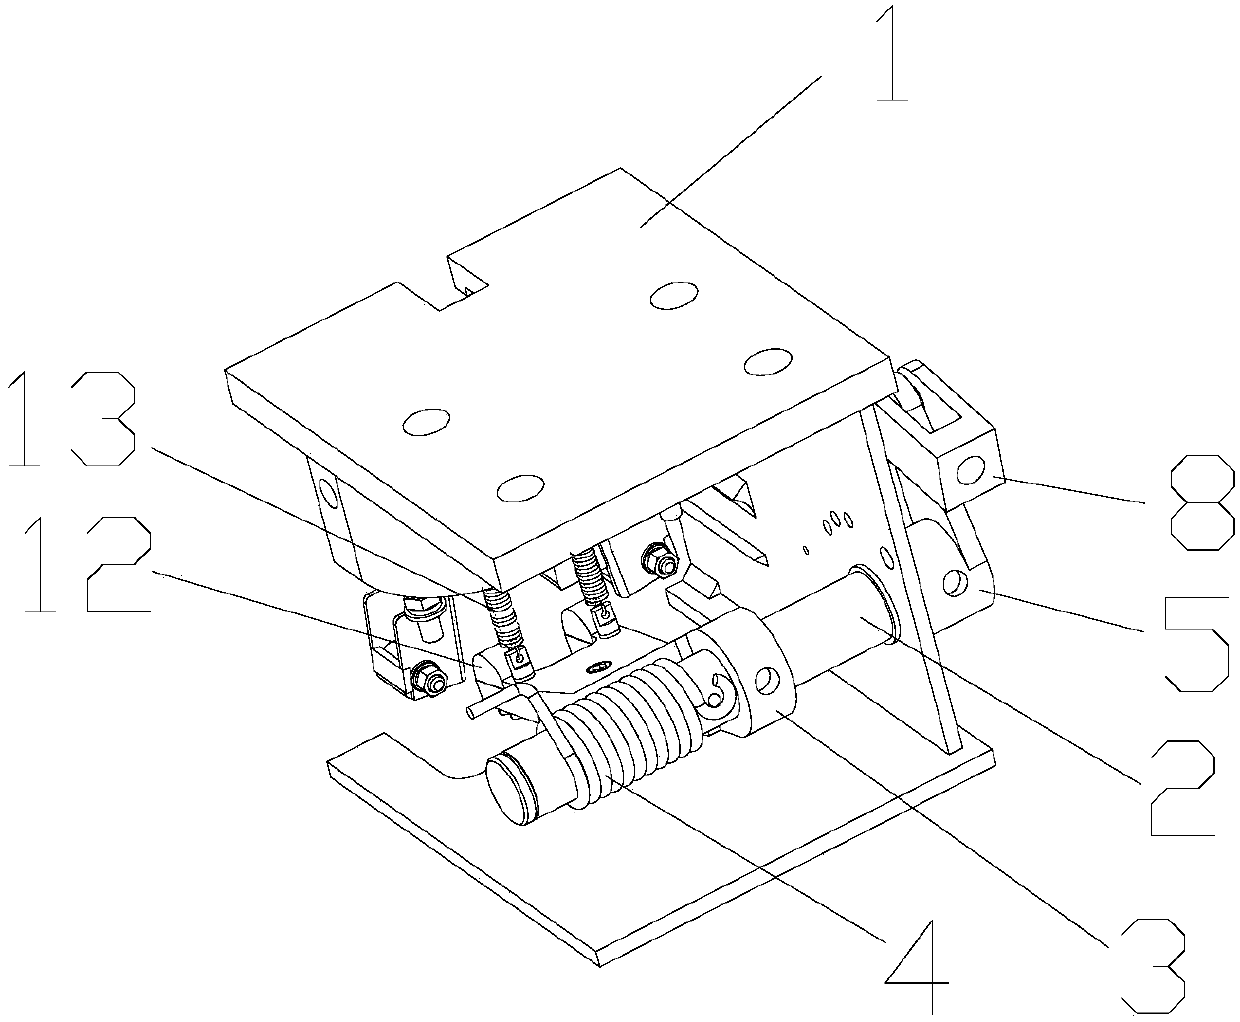 Braking device integrated with safety gear and lifting mechanism